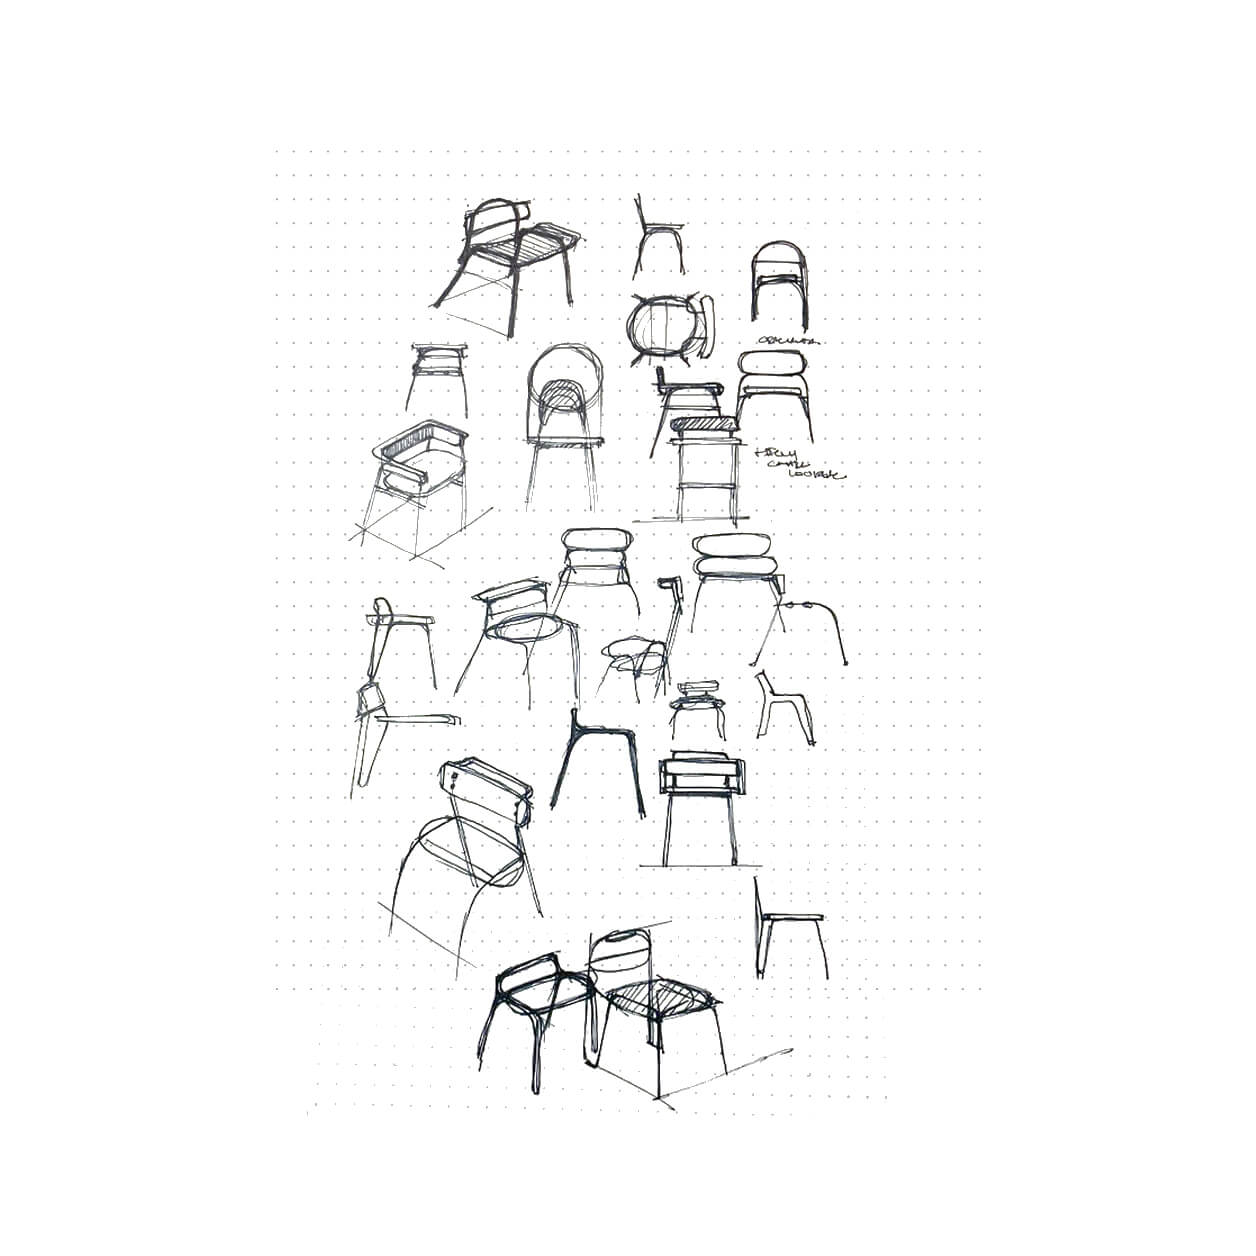 chair-sketch